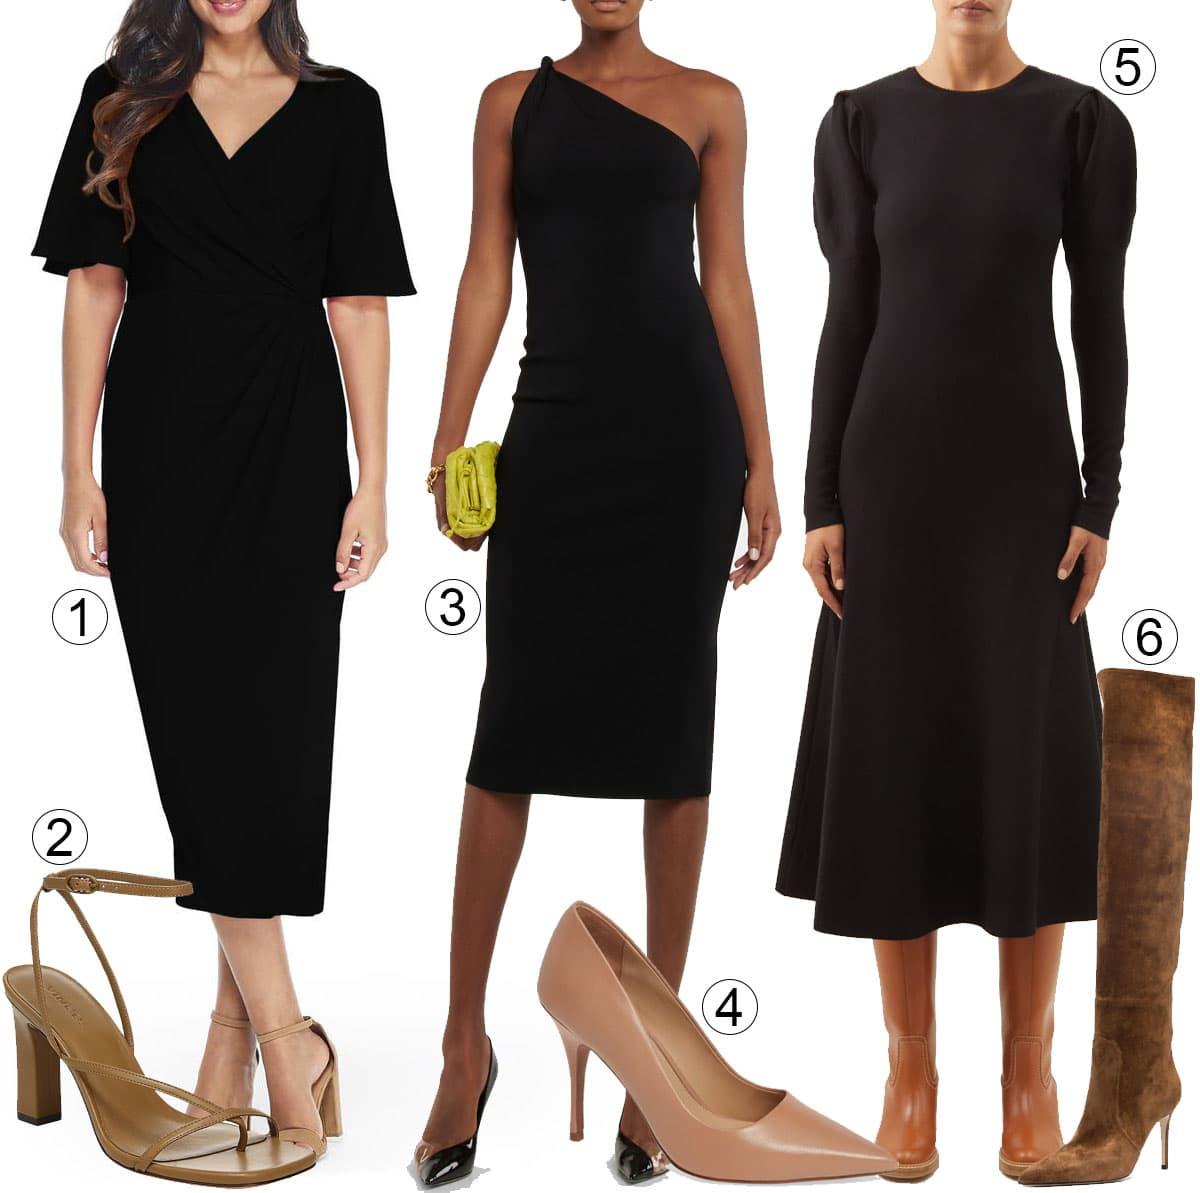 1. Maggy London Flutter Sleeve Faux Wrap Midi Dress; 2. Vince Qiana Strappy Leather Sandal; 3. Galvan Persephone One-Shoulder Midi Dress; 4. Linea Paolo Payton Pointy Toe Pump; 5. Gabriela Hearst Hannah Gathered-Shoulder Wool Dress; 6. Scarosso x Brian Atwood Carra Boots